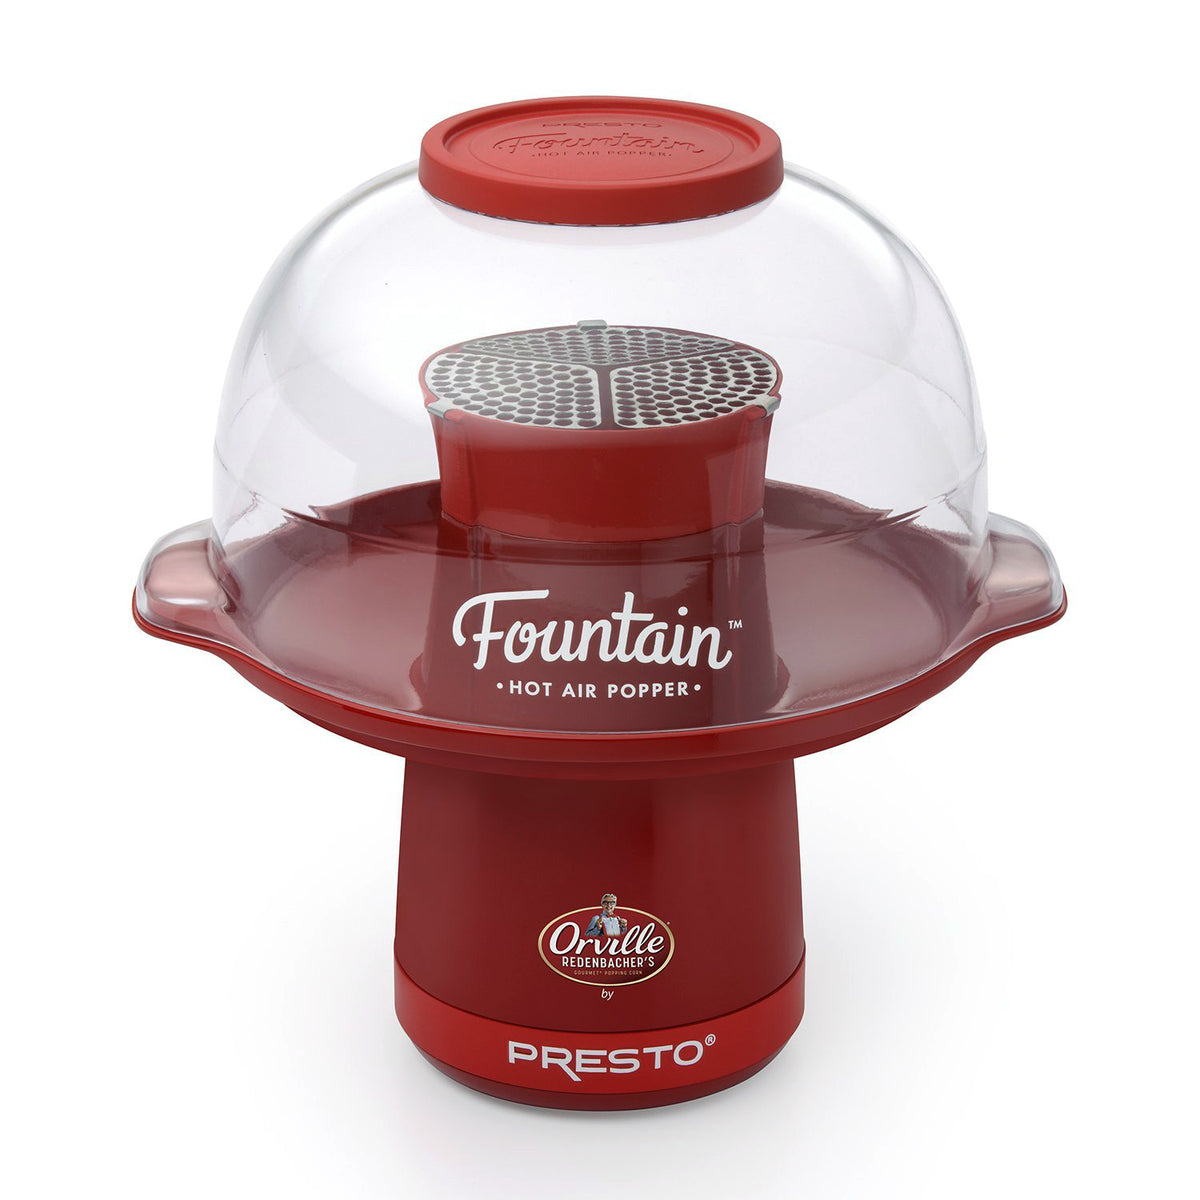 Buy fountain hot air popper - Online store for small appliances, popcorn poppers in USA, on sale, low price, discount deals, coupon code